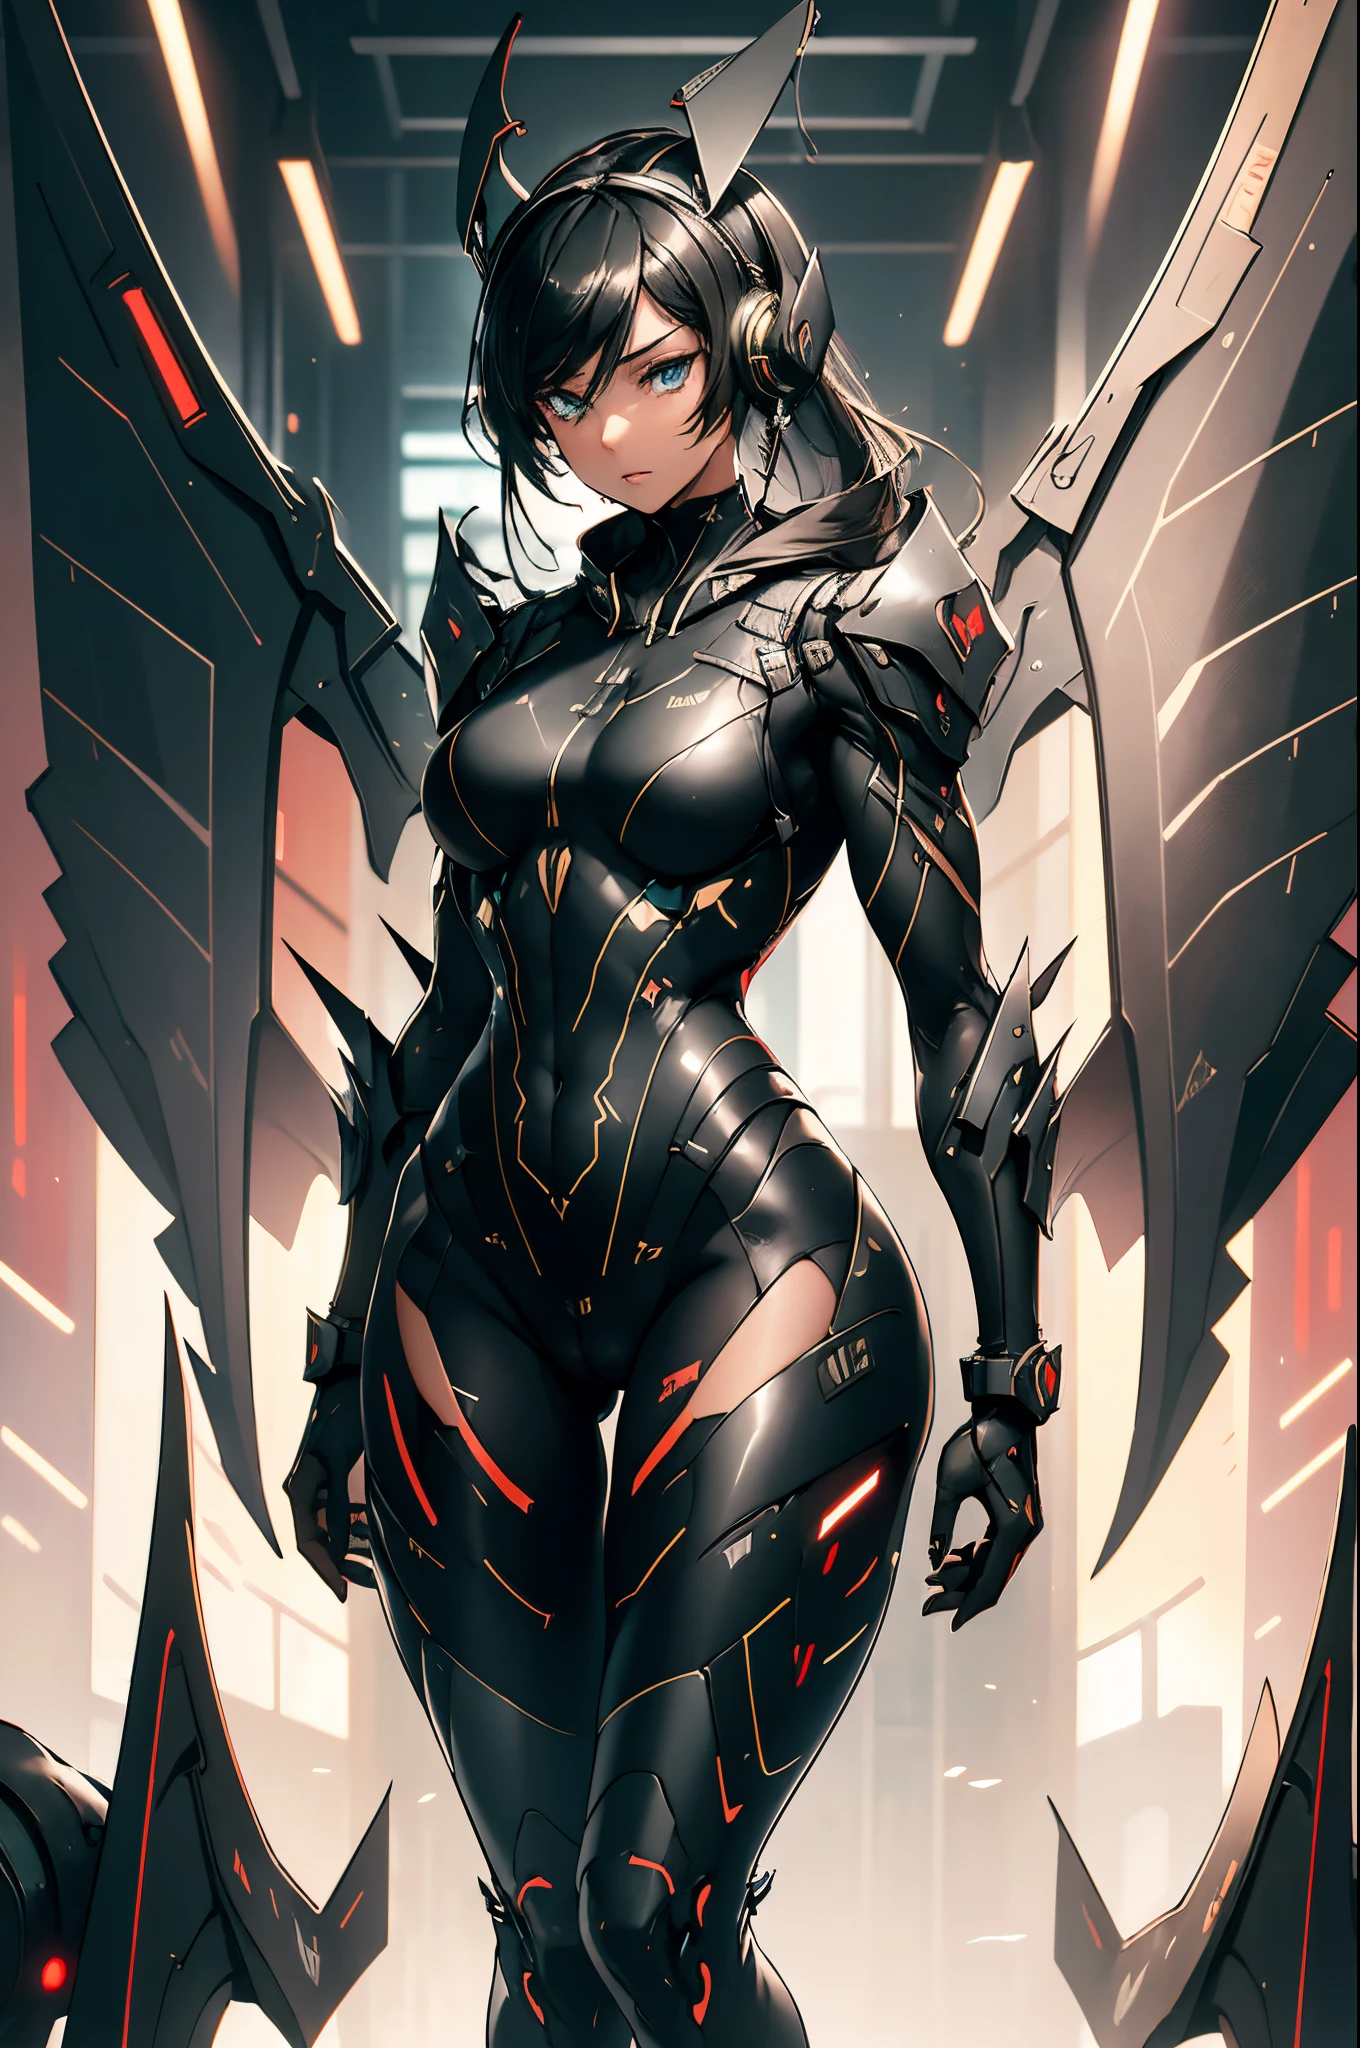 {{{{{masterpiece, best quality, official art, 8k, high resolution illustration}}}}}, 1girl, cute, 2d, japanese, hand drawn, anime style, girl in a smooth curve, matte black bodysuit inspired by a futuristic stealth bomber, (plane tail-ear headphones:1.6), The United States Air Force logo on outfit, standing on a runway military airport, gaze angled 30 degrees to the side, (fighter plane wings:1.6), black hair, blue eyes, glowing eyes, dark uniform, thick thighs, serious, long legs, adult, detail wings, (muscular girl:1.5), black uniform, muscular arms, triceps, biceps, (8-pack abs:1.3), (deadly:1.2), (horrible:1.2), (piercing gaze:1.2), machine of death, emotionless android, the most dangerous weapon of the world, cyborg girl, strong girl, overwhelming presence, warlord, humamized fighter, red antennas on head, {black bodysuit}, black latex pants, lips